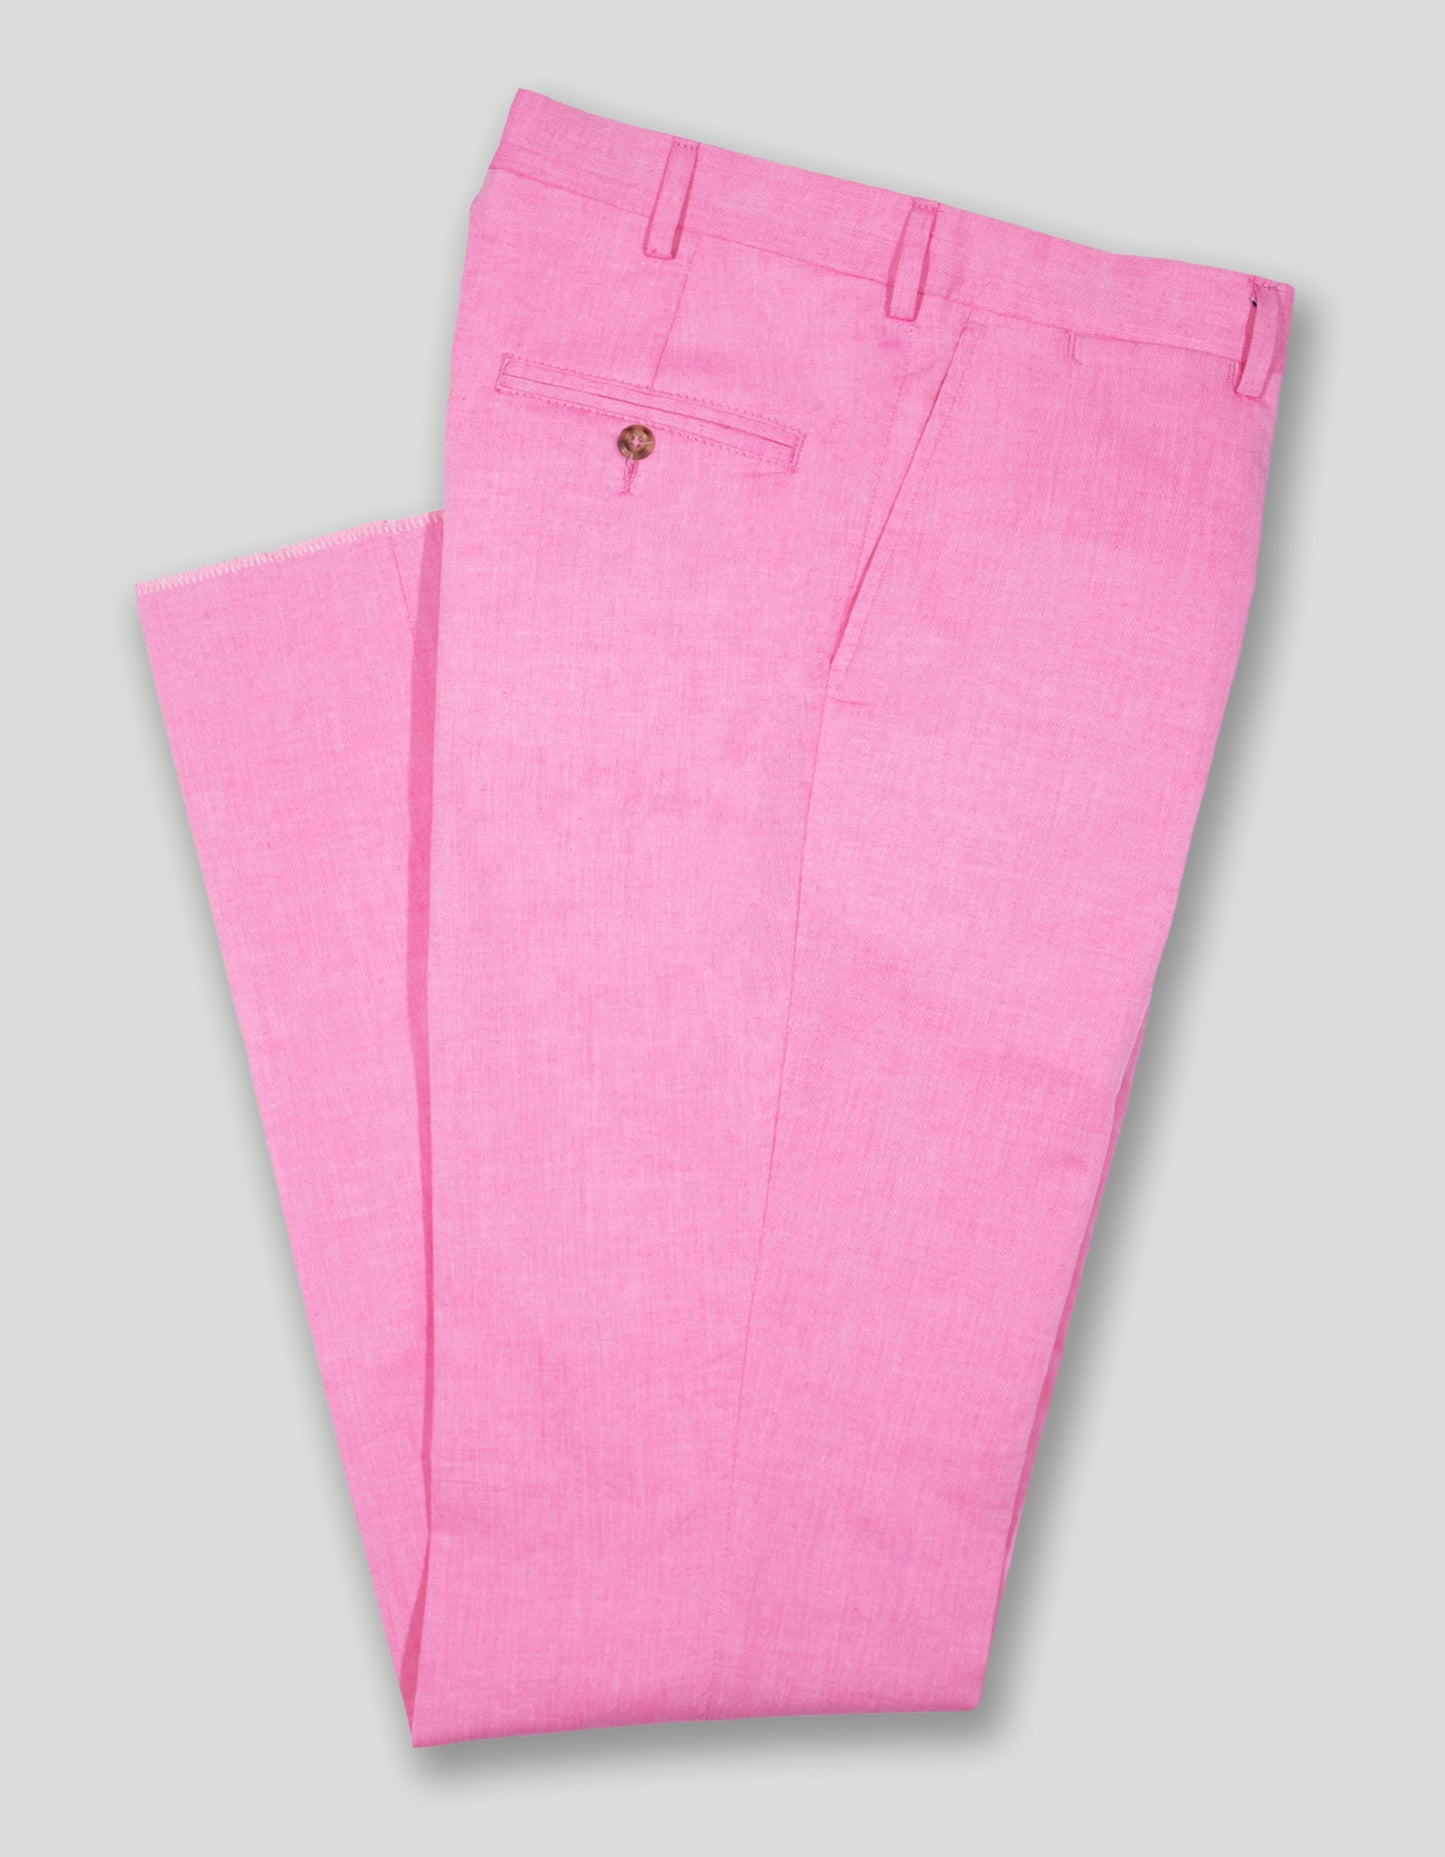 PINK CHAMBRAY PANT - CLASSIC FIT